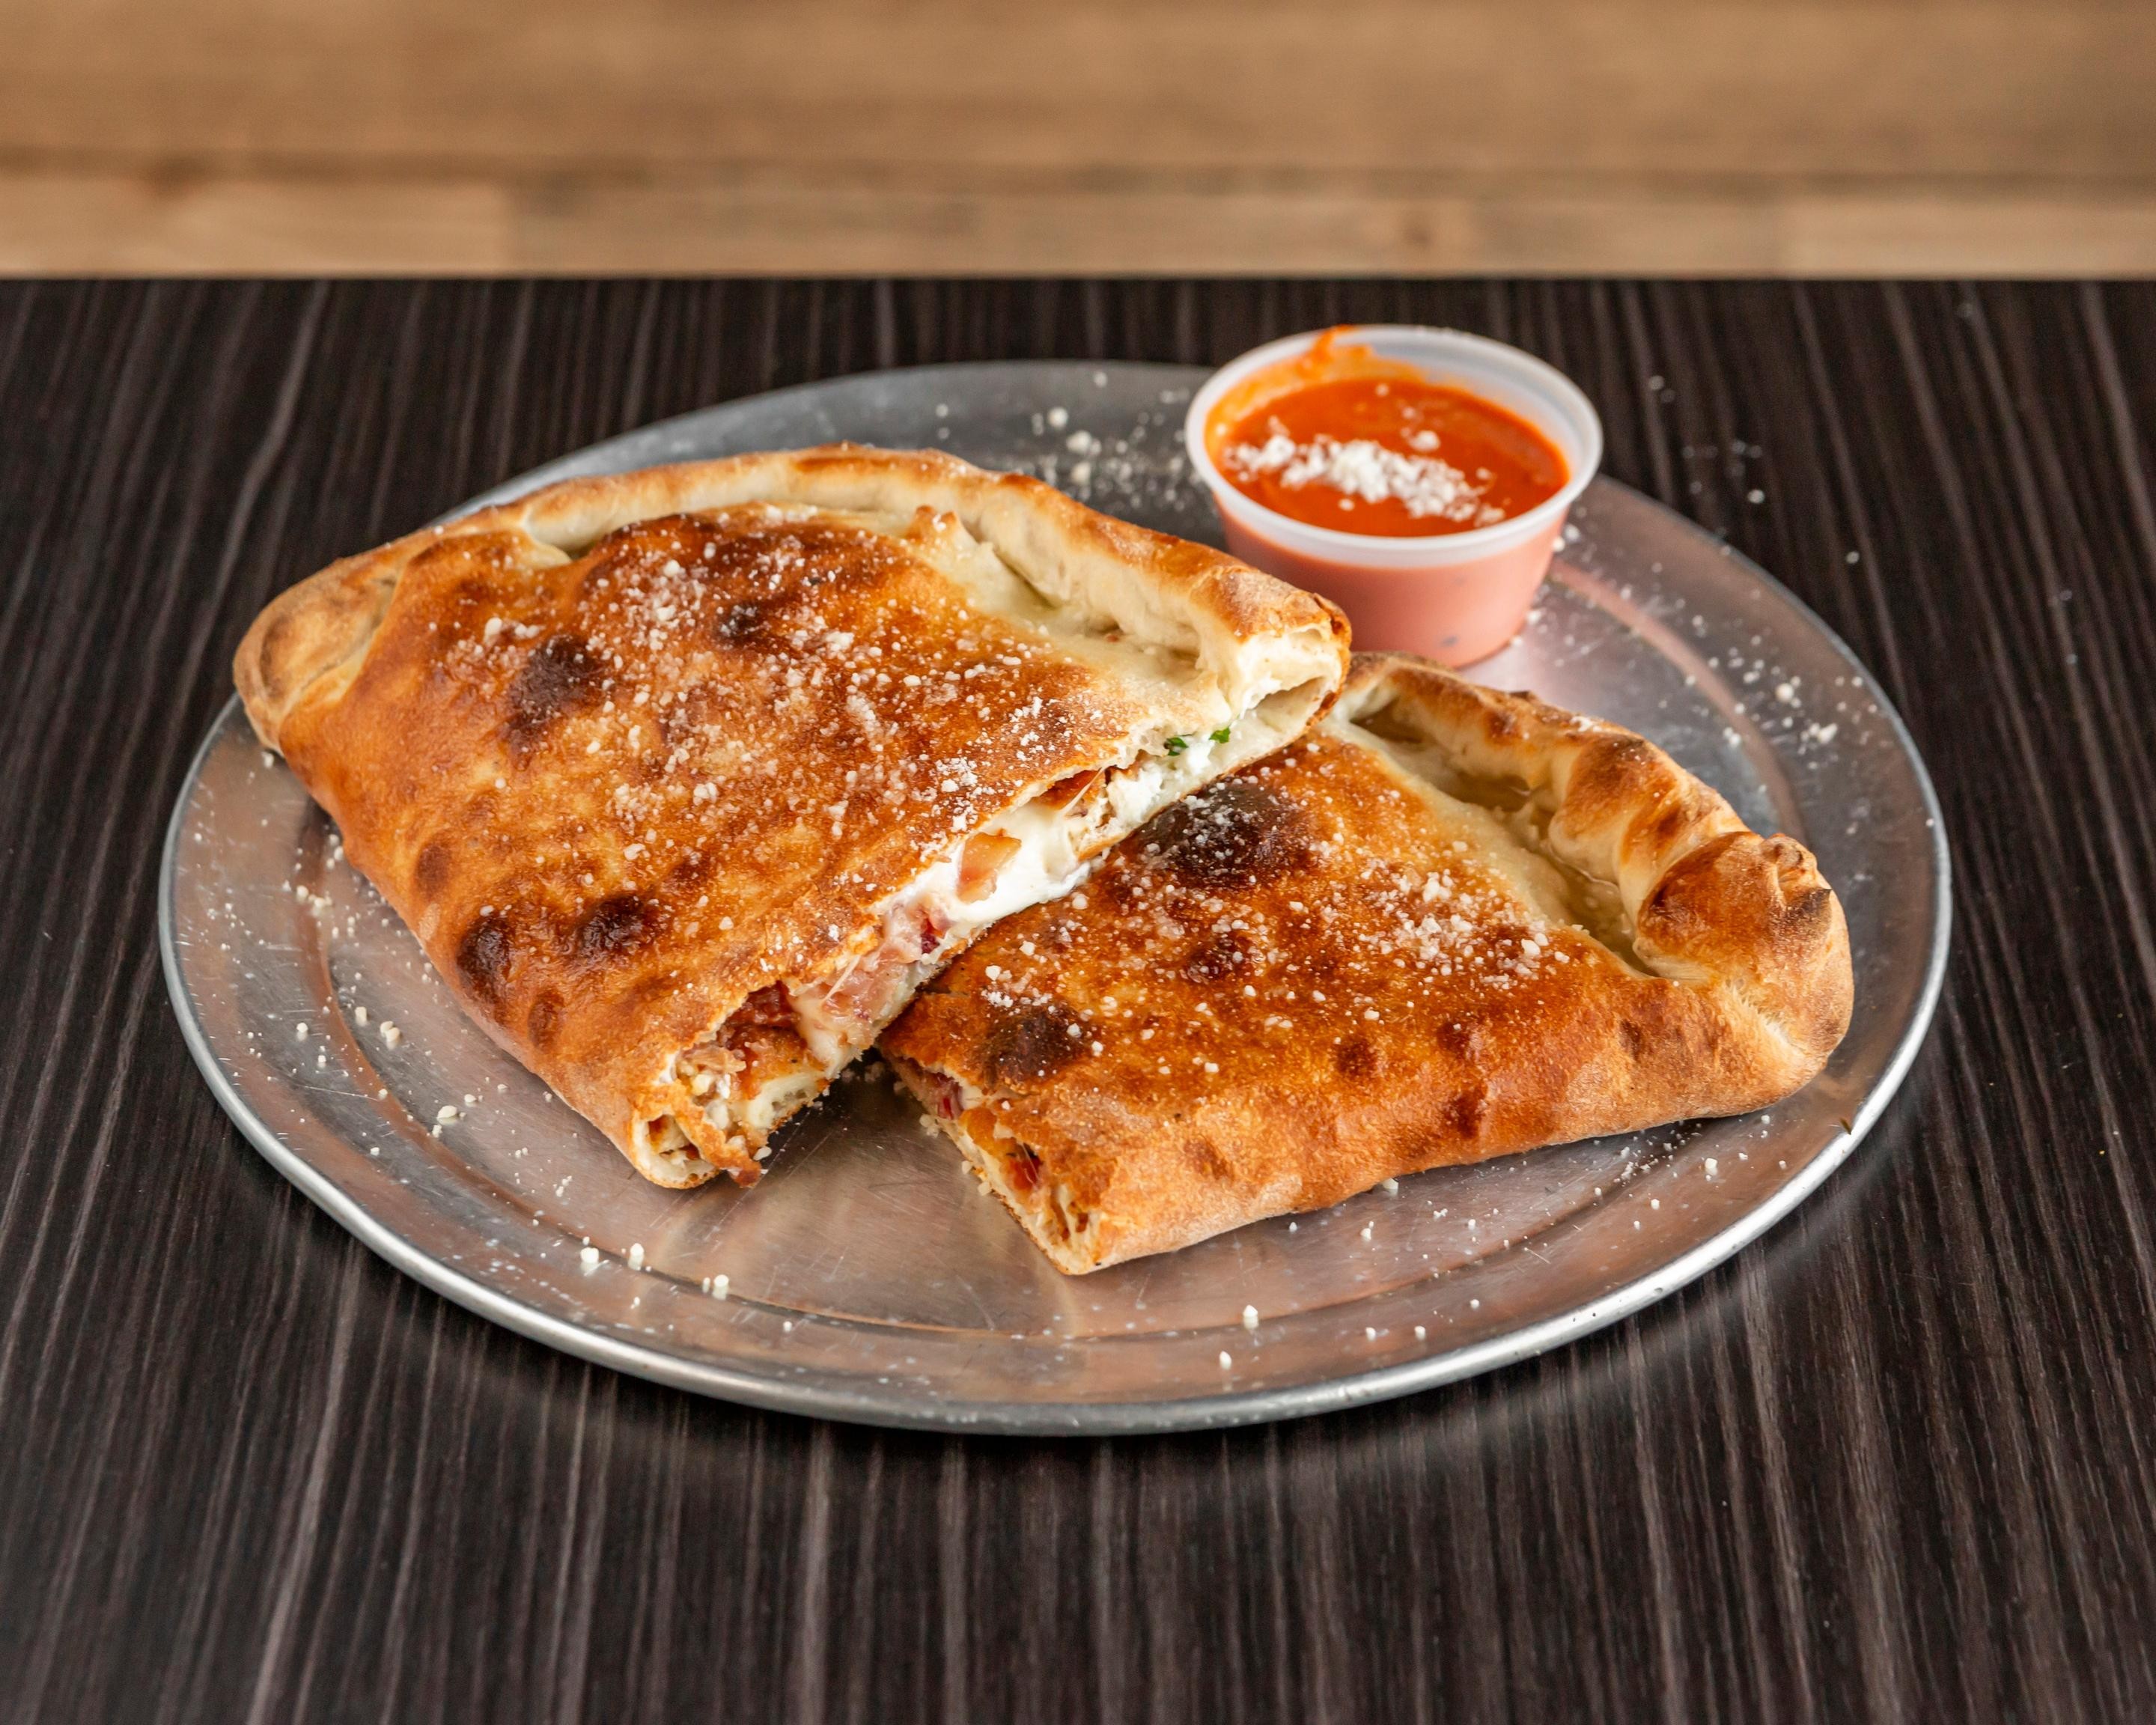 The Angry Bird Calzone